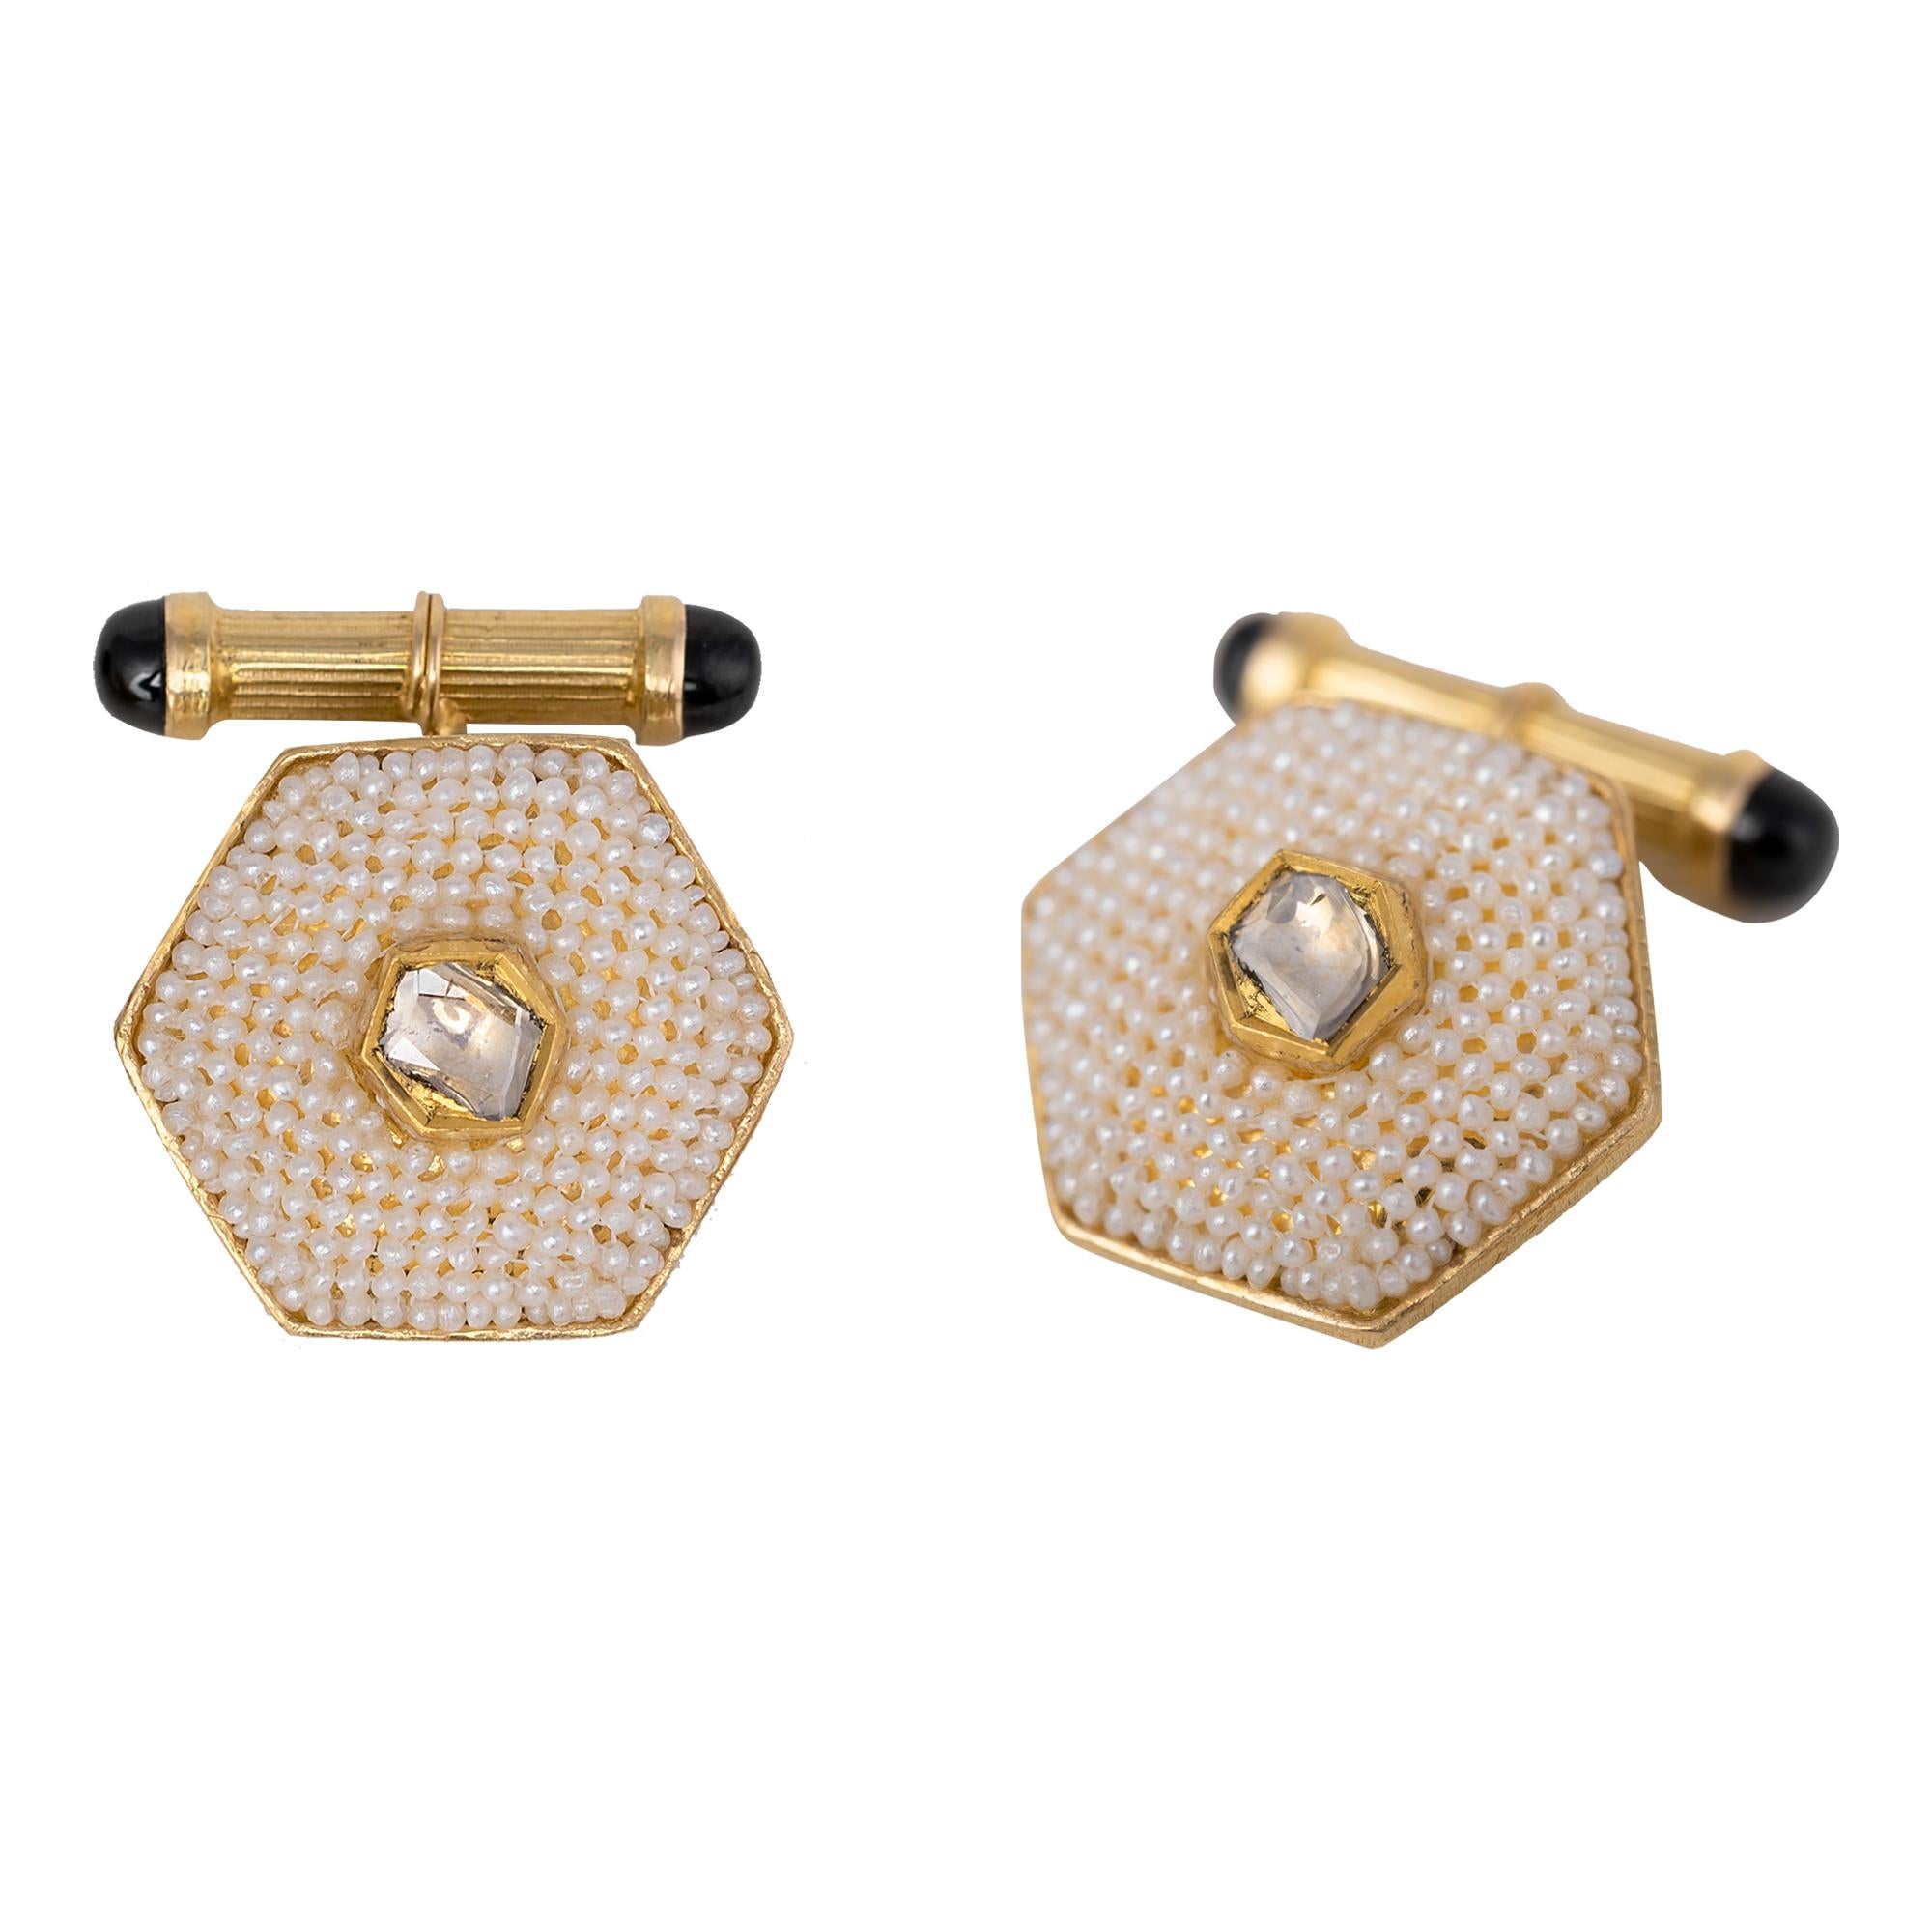 18 Karat Yellow Gold Diamond and Pearl Cufflinks
This sophisticated 19th-century-inspired off-white pearl and diamond polki cufflink is immaculate. The center is an unusual fancy cut polki diamond solitaire in an art-deco closed setting with